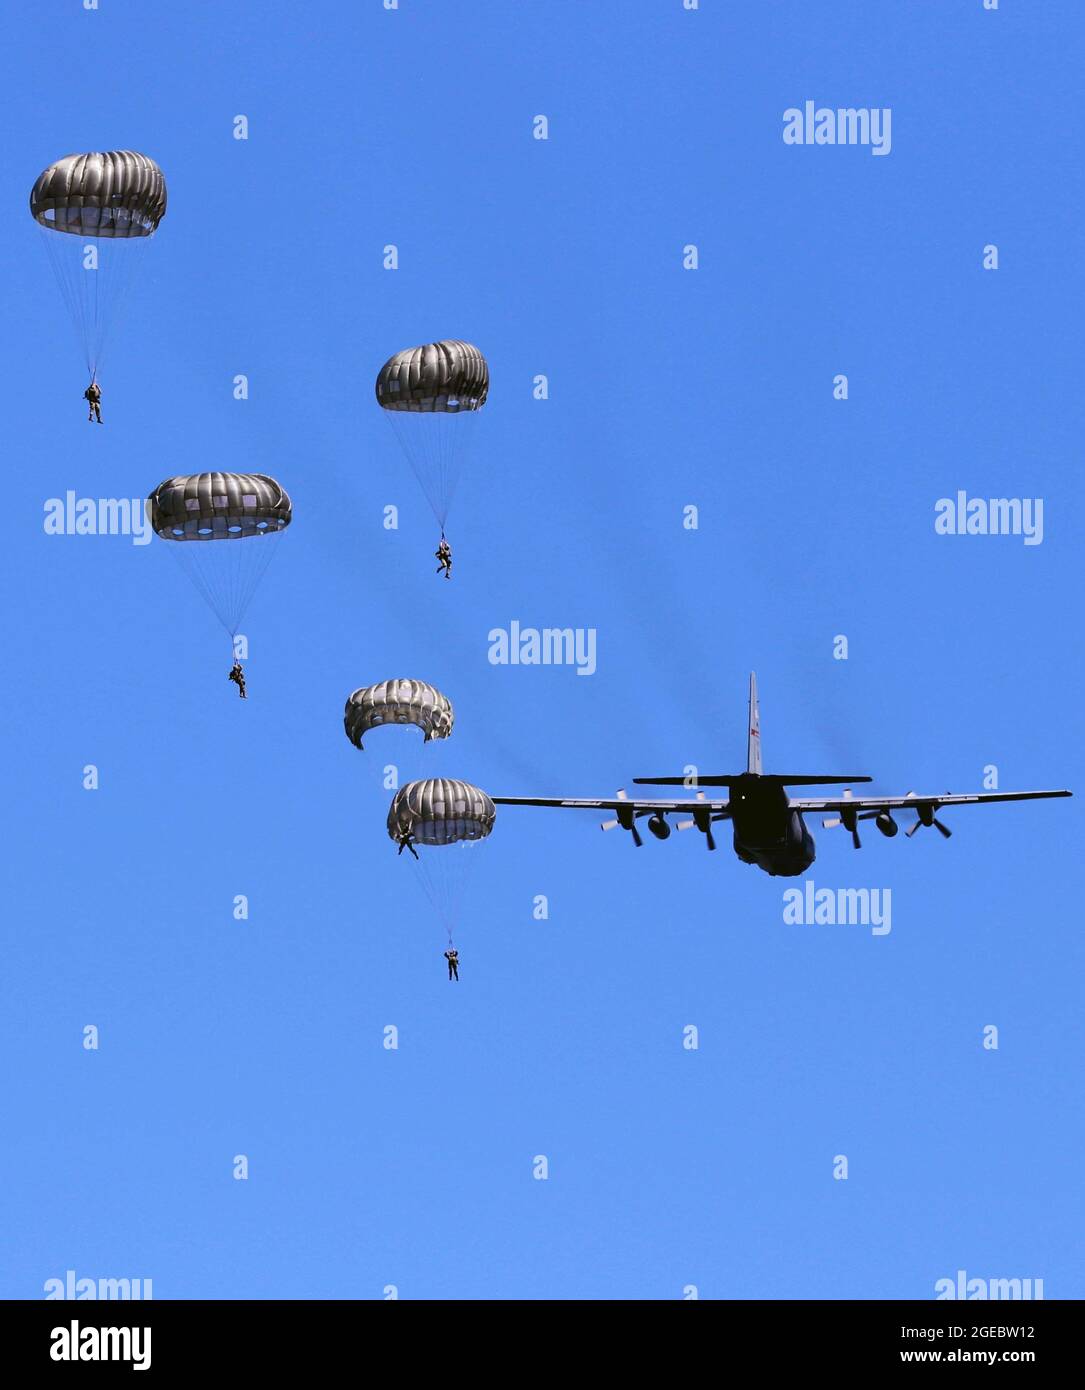 Soldiers with the 294th Quartermaster Company, 338th Quartermaster Company, Texas Army National Guard, the 3rd Special Forces Group, soldiers with the Latvian Army’s Special Forces Group and British Army’s 4th Battalion, Parachute Regiment (4 PARA), jump and parachute out of a C-130 Hercules aircraft over Camp Grayling Joint Maneuver Training Center, Grayling, Michigan, Aug. 13, 2021. The service members conducted joint airborne training during Northern Strike 21, which is an opportunity to build readiness and interoperability with other units and multinational partners while training in reali Stock Photo